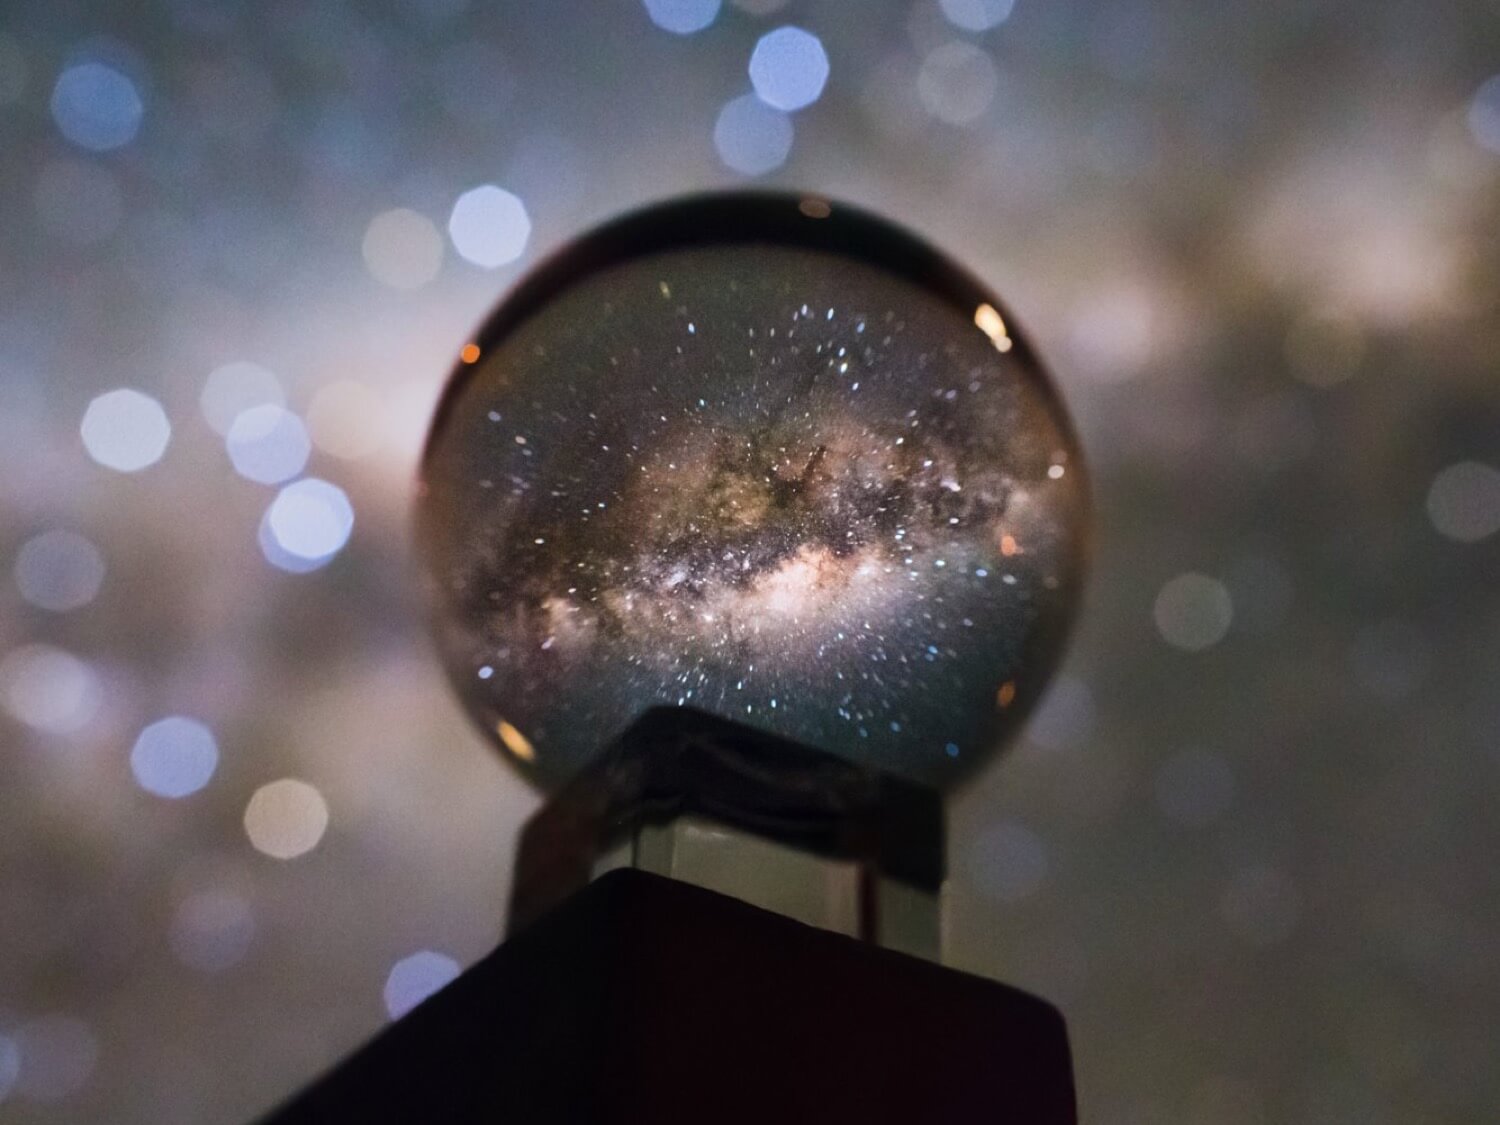 Photo of the milky Way using the crystal ball looks stunning